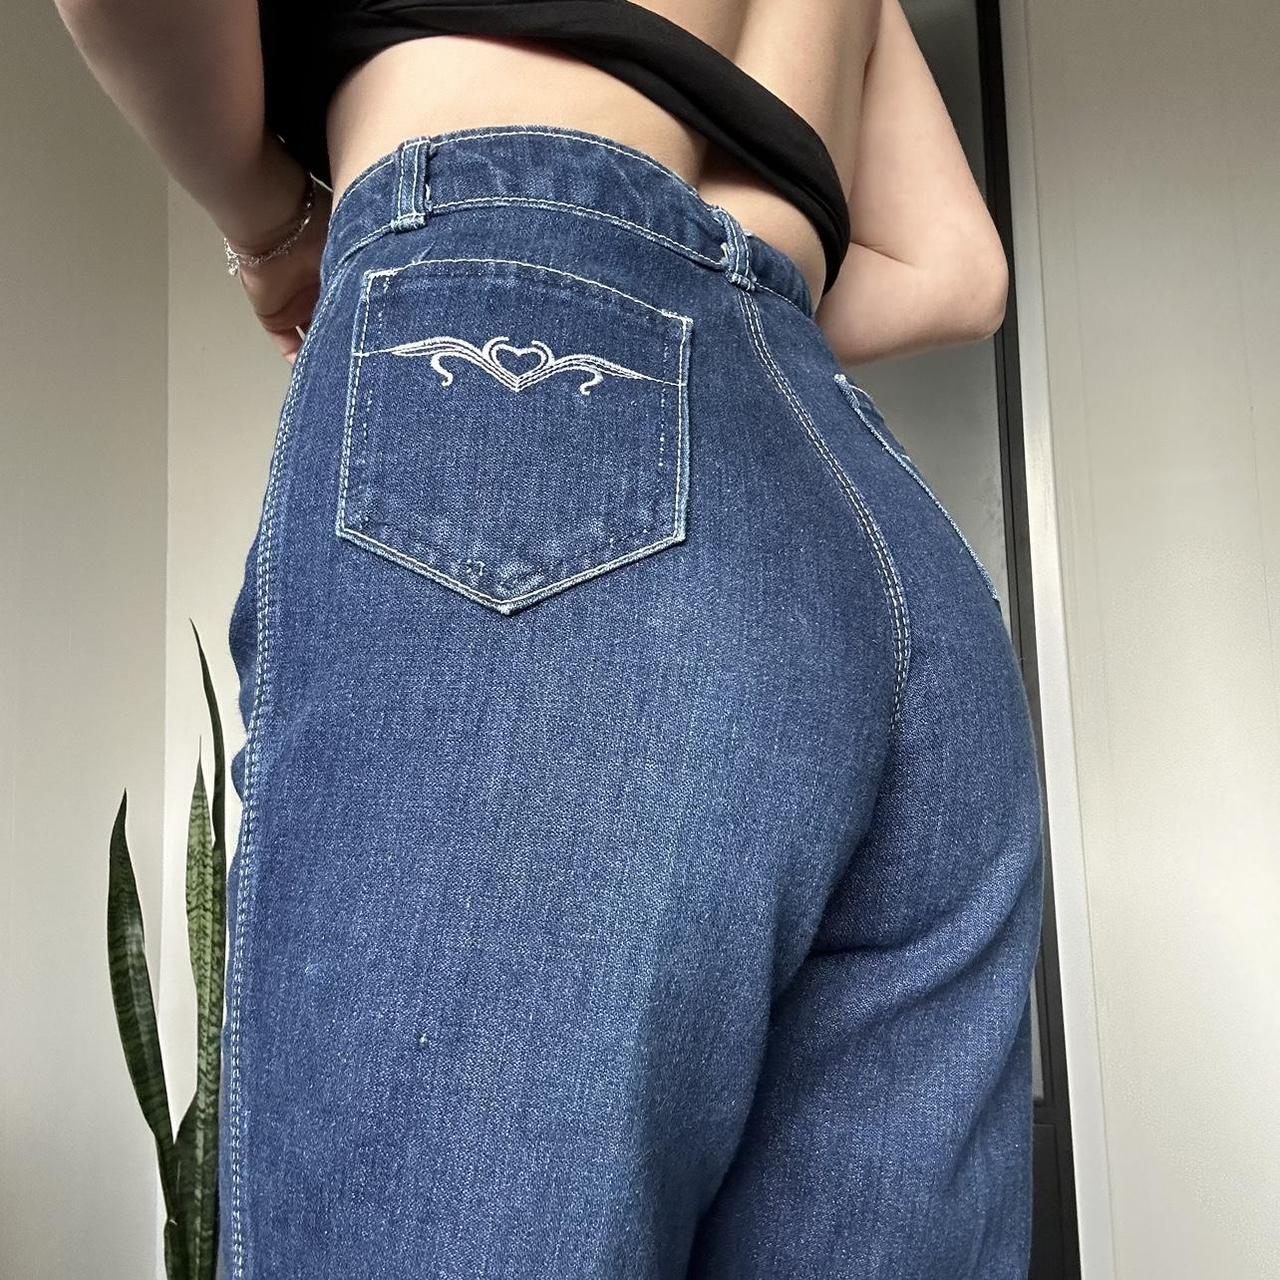 Women's Navy and Blue Jeans | Depop